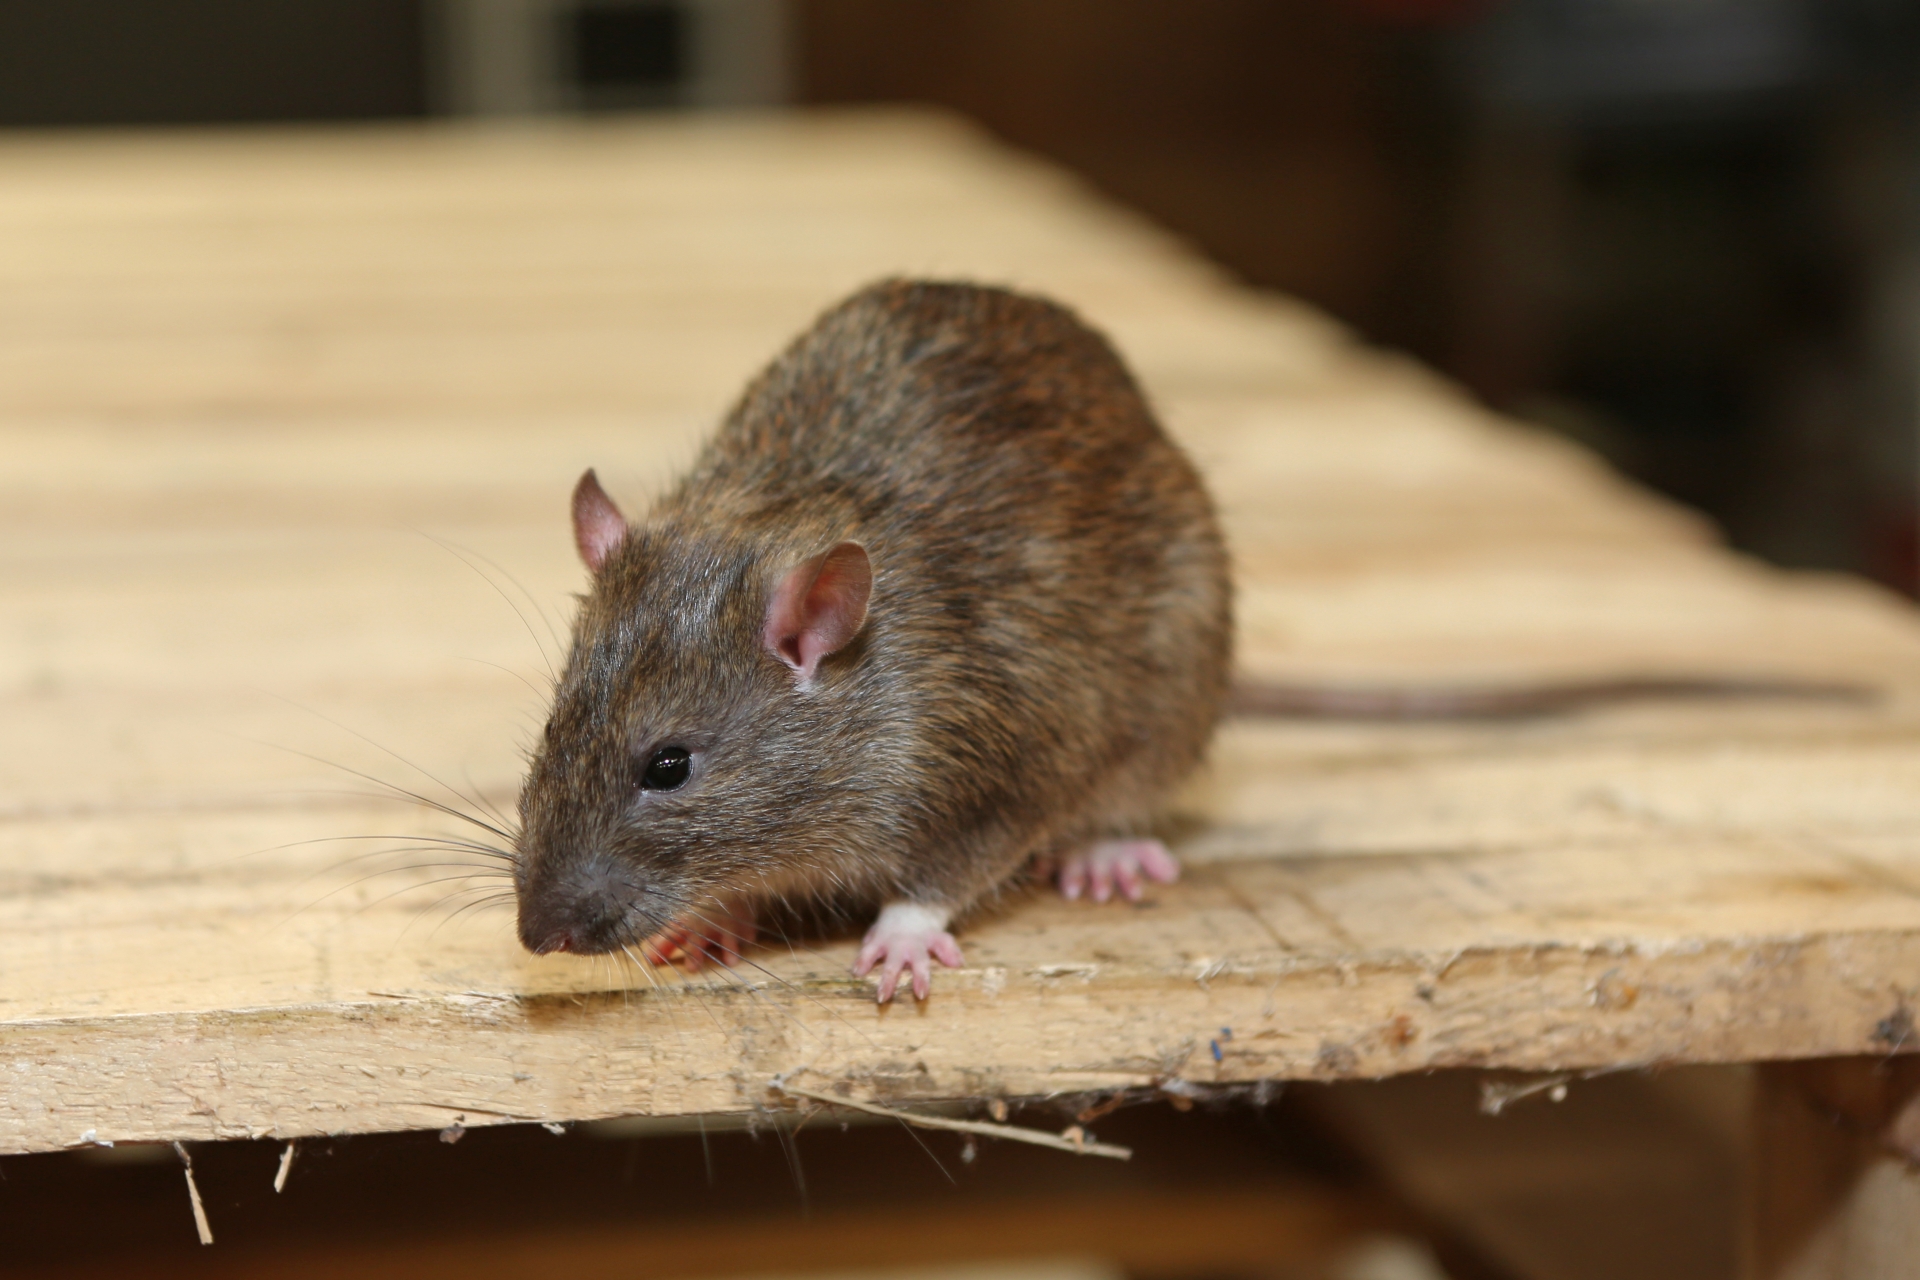 Rat extermination, Pest Control in Addlestone, New Haw, Woodham, KT15. Call Now 020 8166 9746